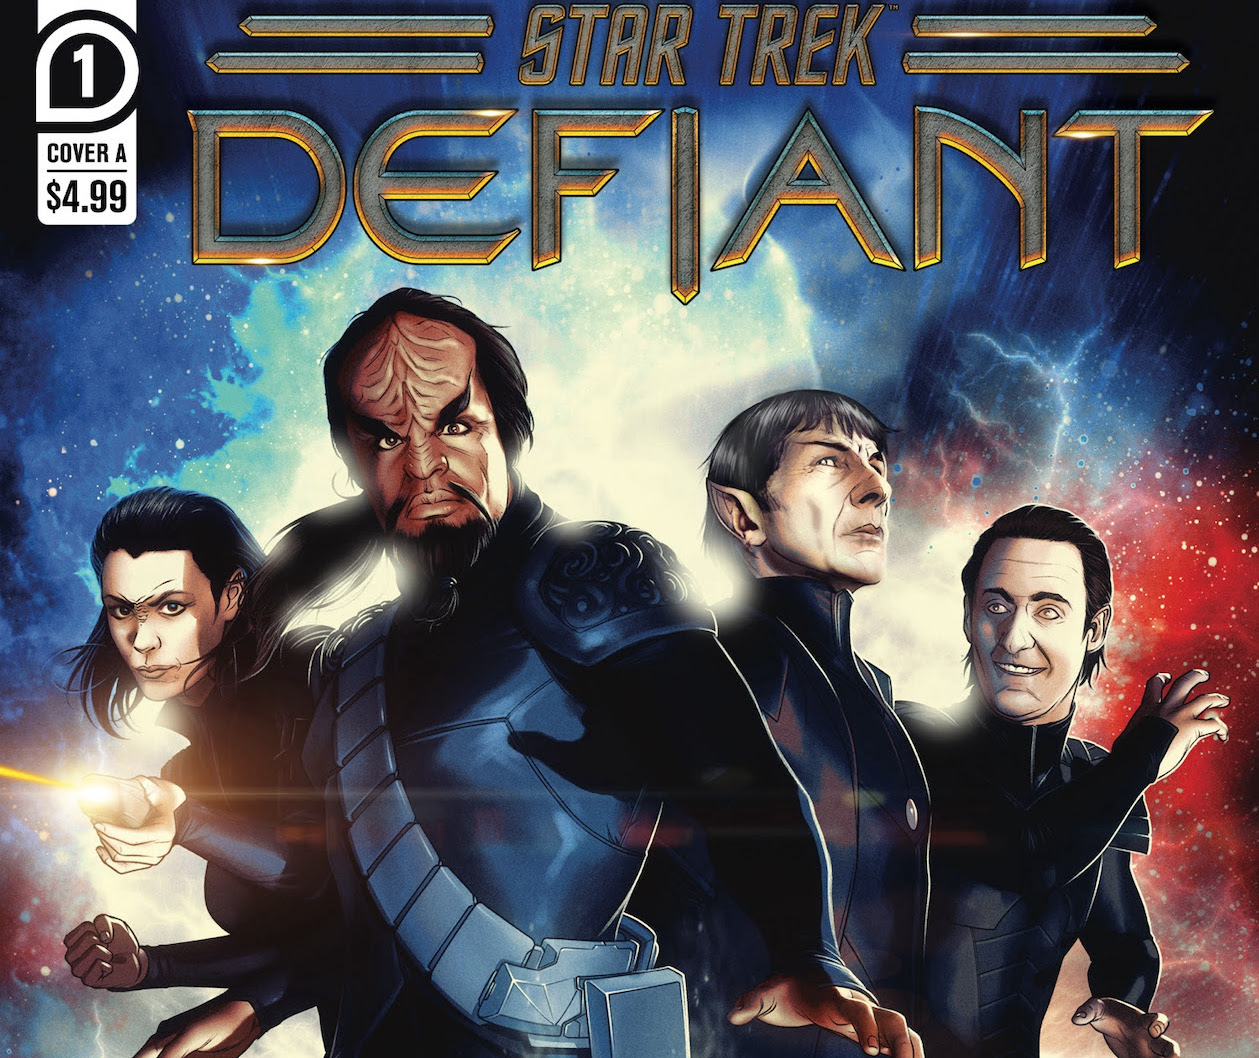 'Star Trek: Defiant' blends 'The Dirty Dozen' and sci-fi in March 2023